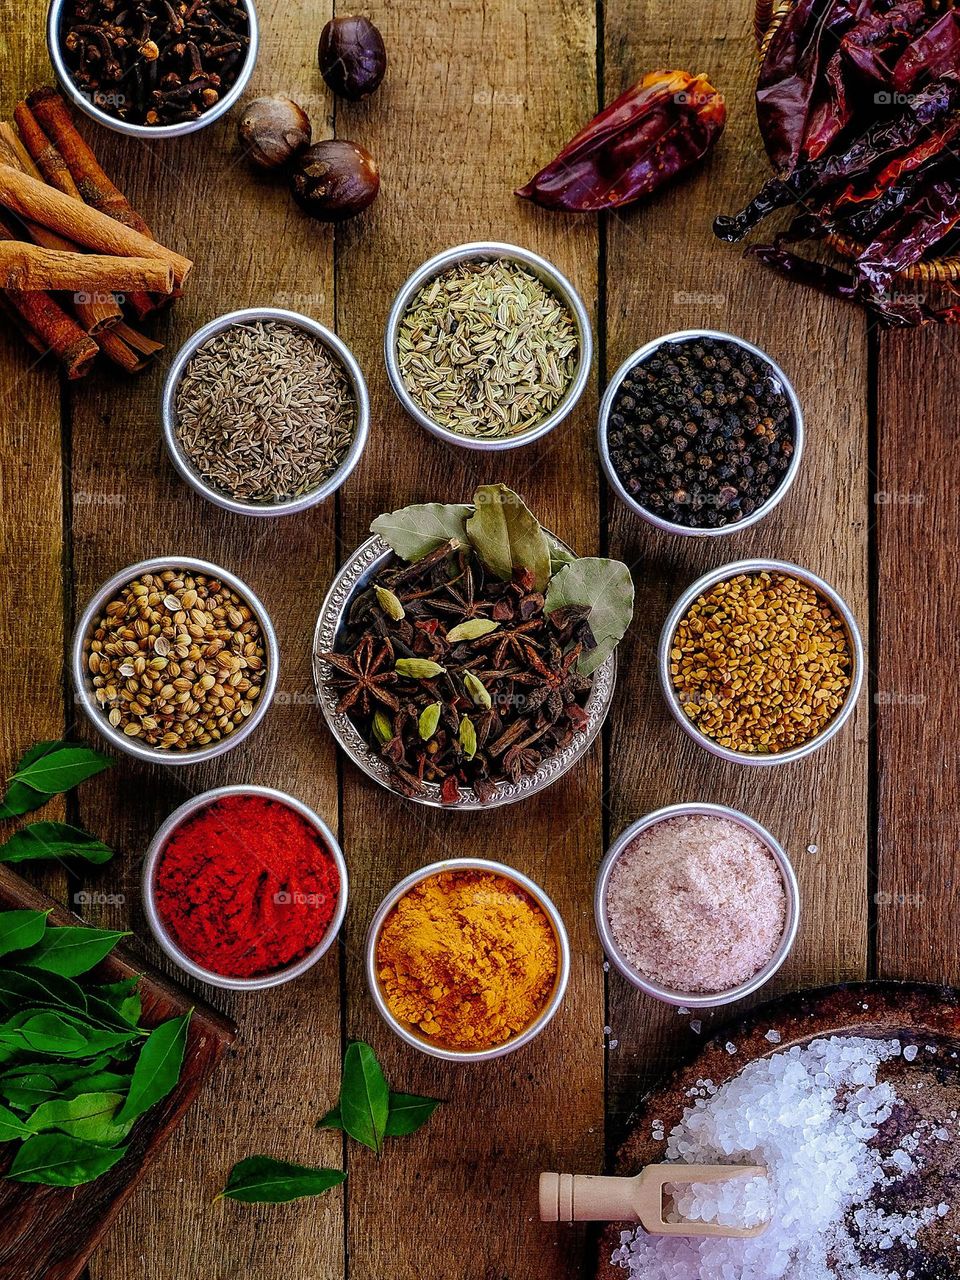 Spices and herbs. Food and cuisine ingredients. Colorful natural additives. healthy or cooking, asian food.